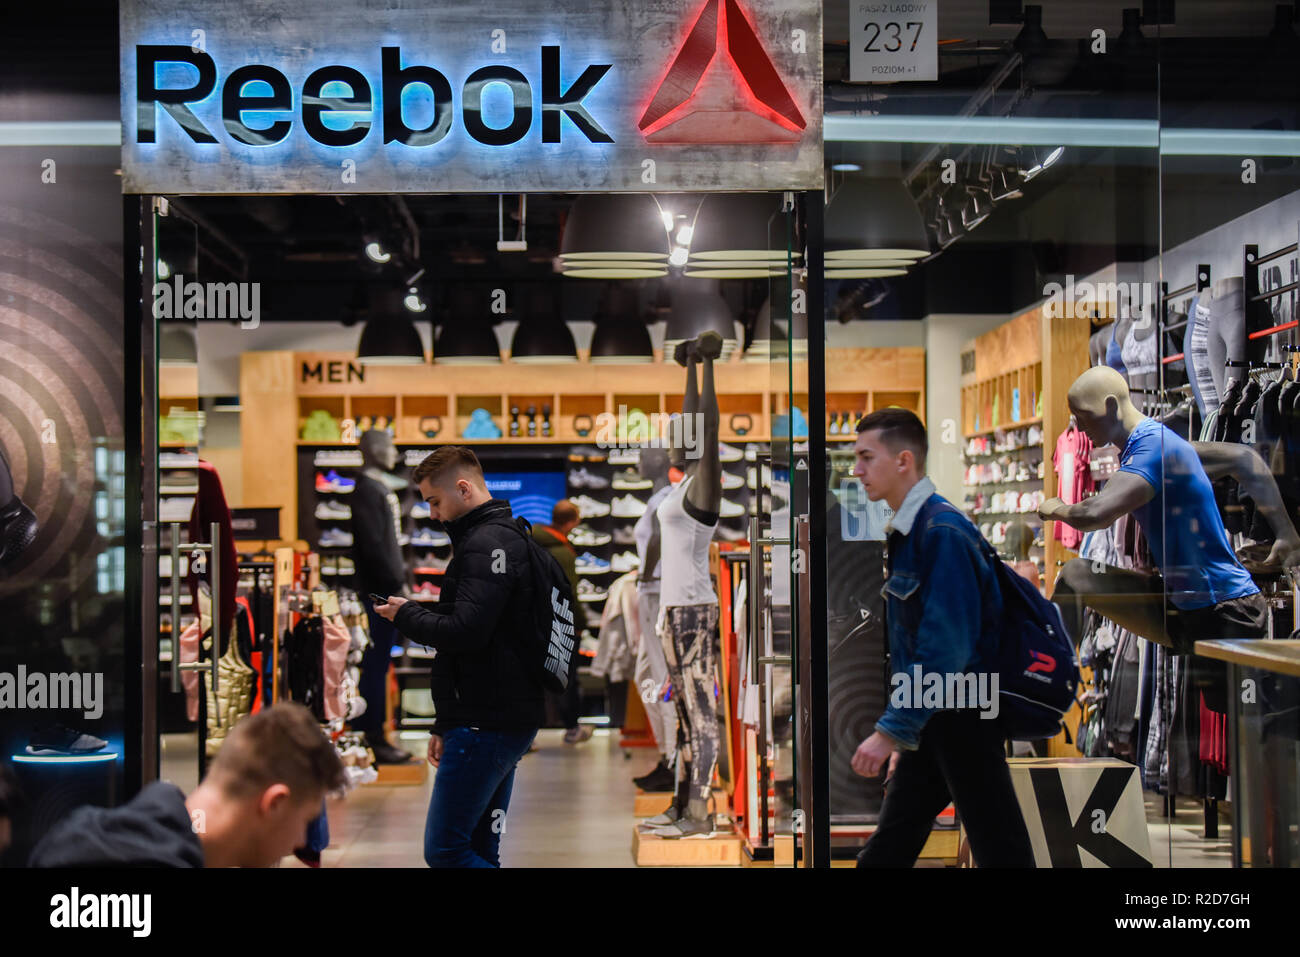 reebok outlet madrid| Enjoy free shipping | www.syncro-system.us